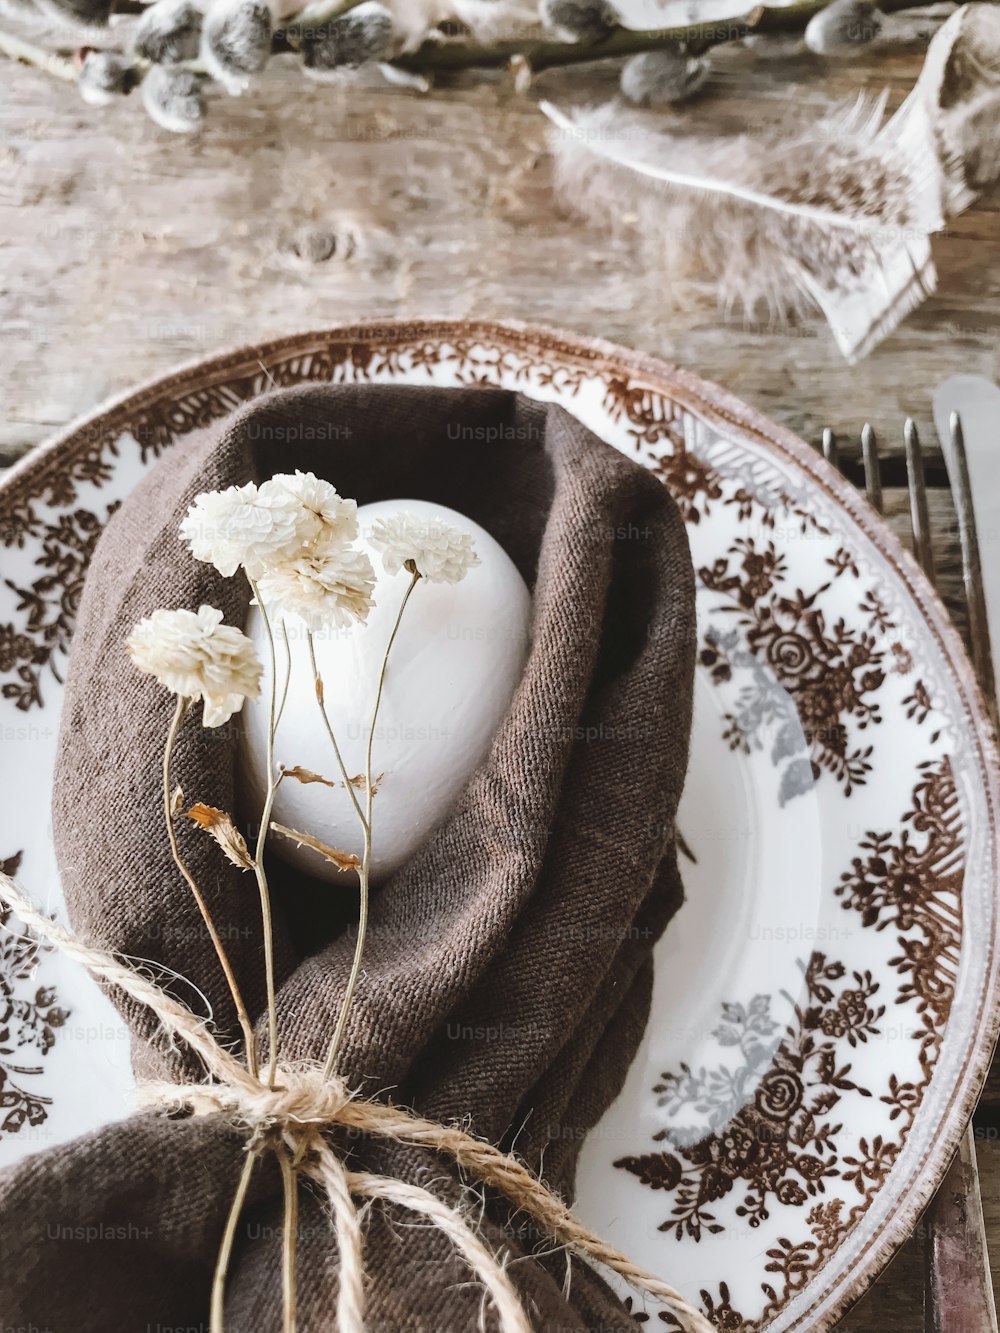 Stylish rustic Easter table setting. Natural easter egg in napkin with flowers, vintage plate and cutlery, soft feathers on aged wooden table. Rural Easter still life. Happy Easter